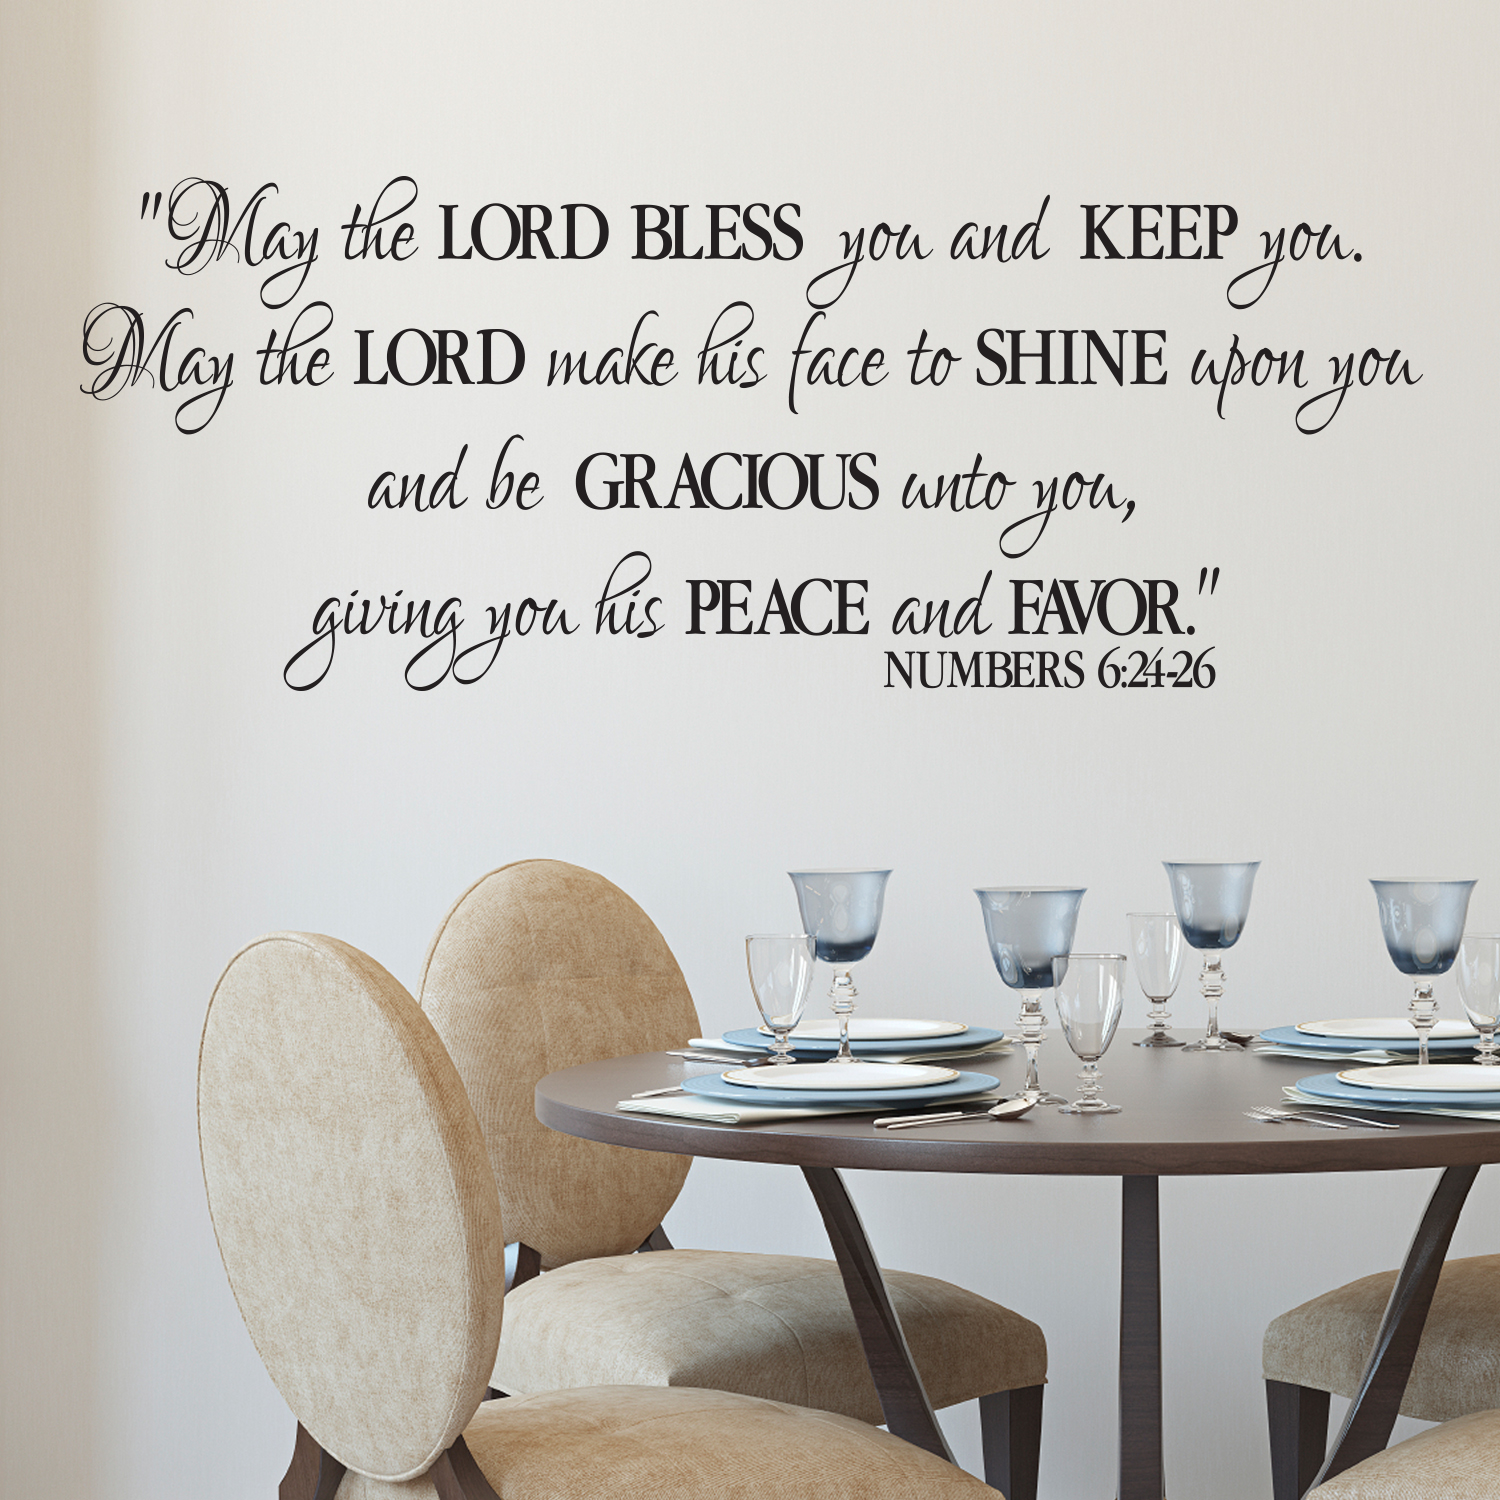 Numbers 6v24 26 Vinyl Wall Decal 3 May The Lord Bless You And Keep